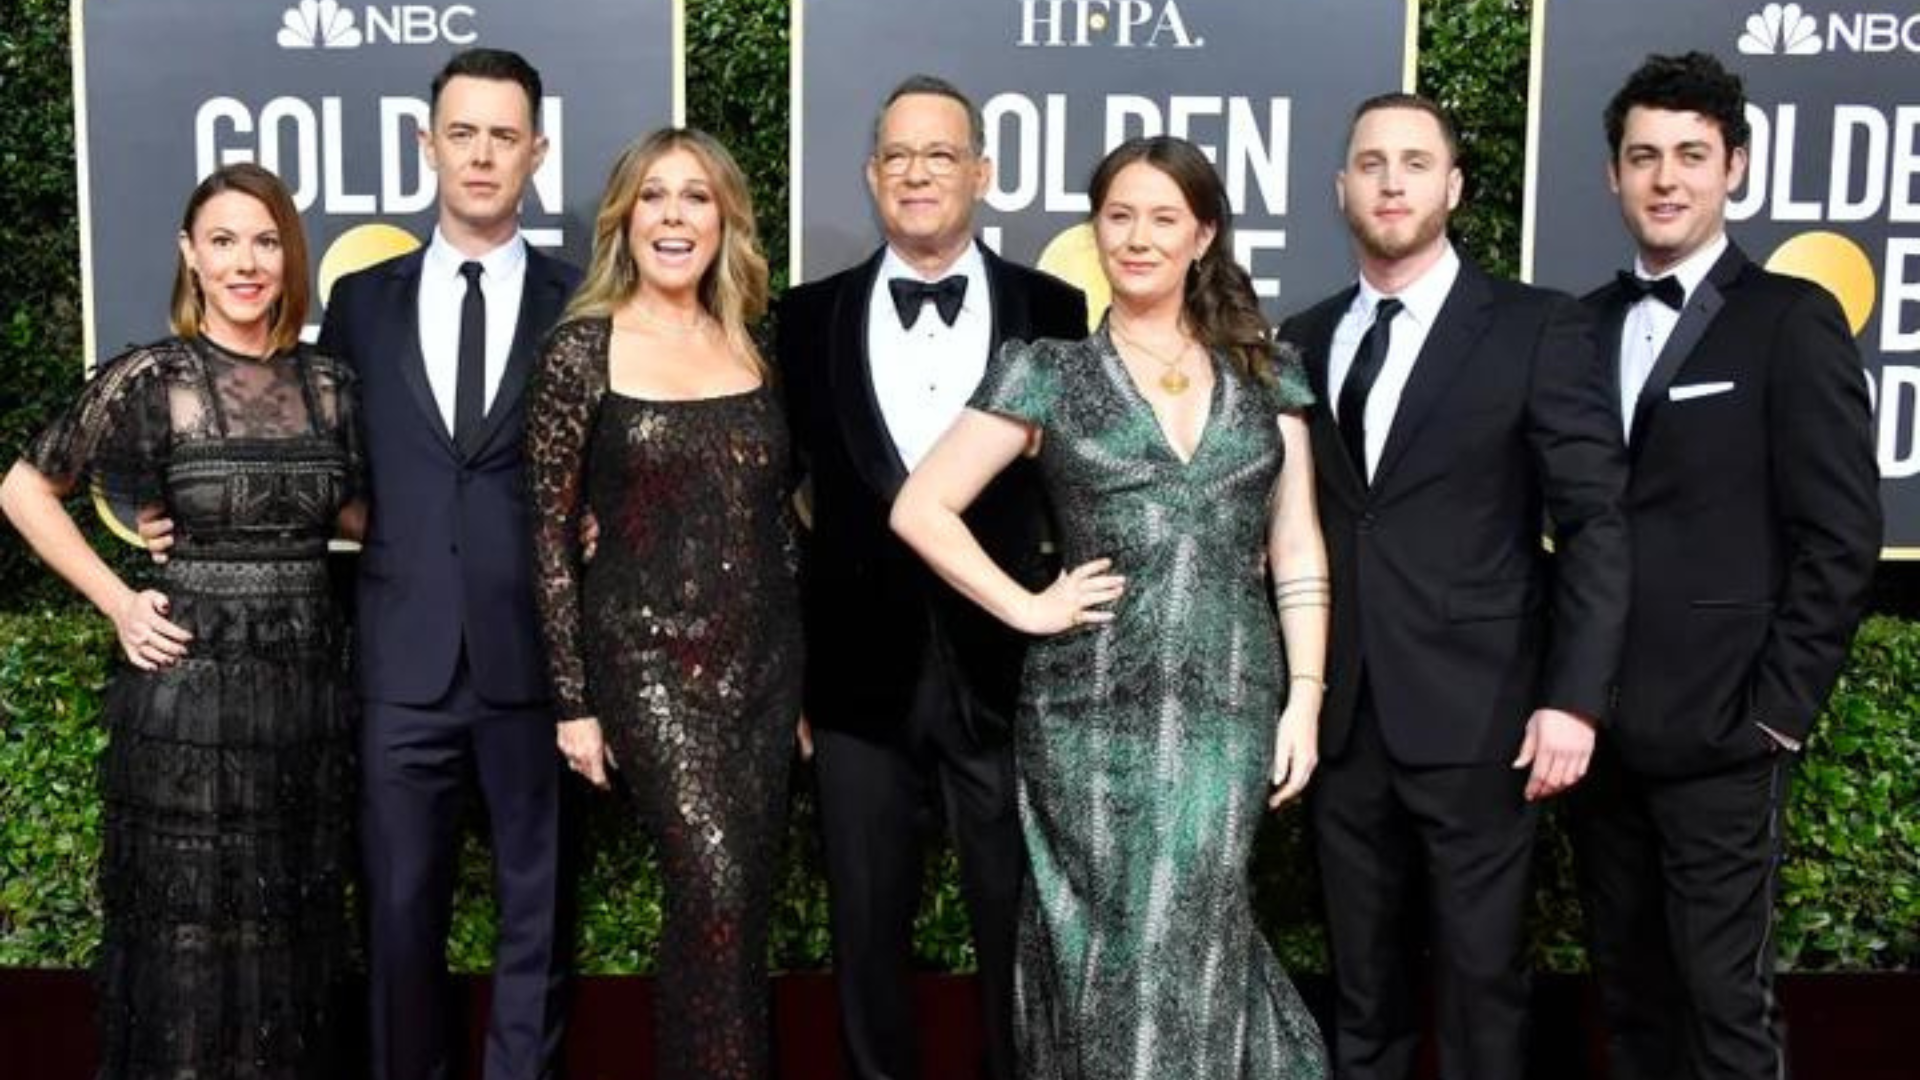 Truman Hanks with his parent's and siblings in formal wear attire during the golden globe awards